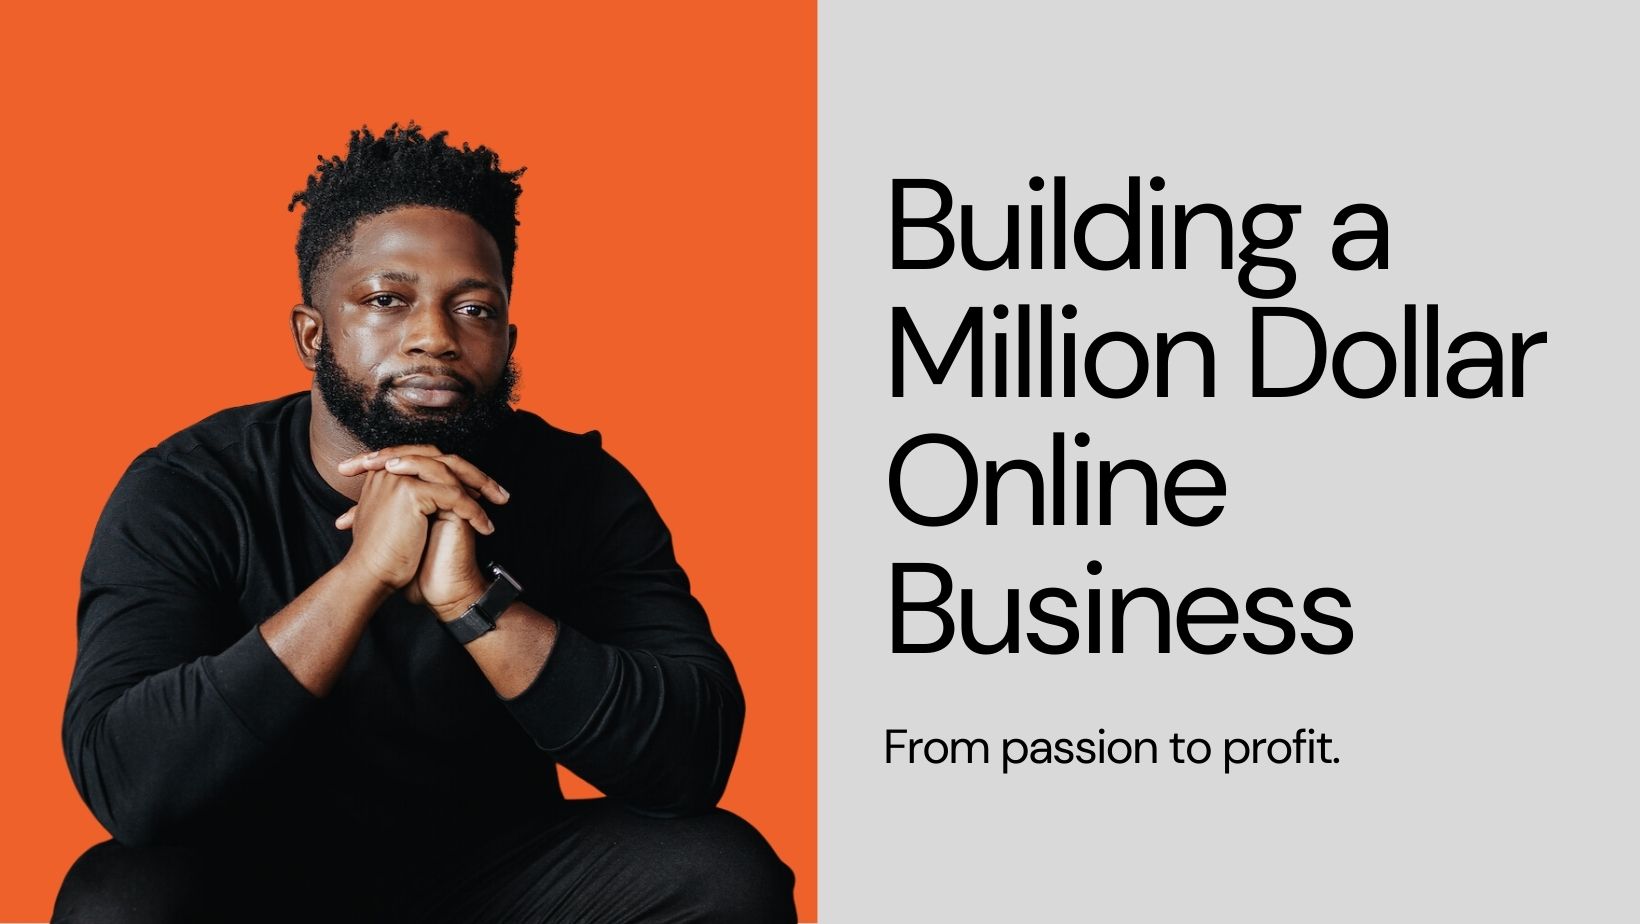 The Power of Focus: Lessons Learned from Building a Million Dollar Online Business